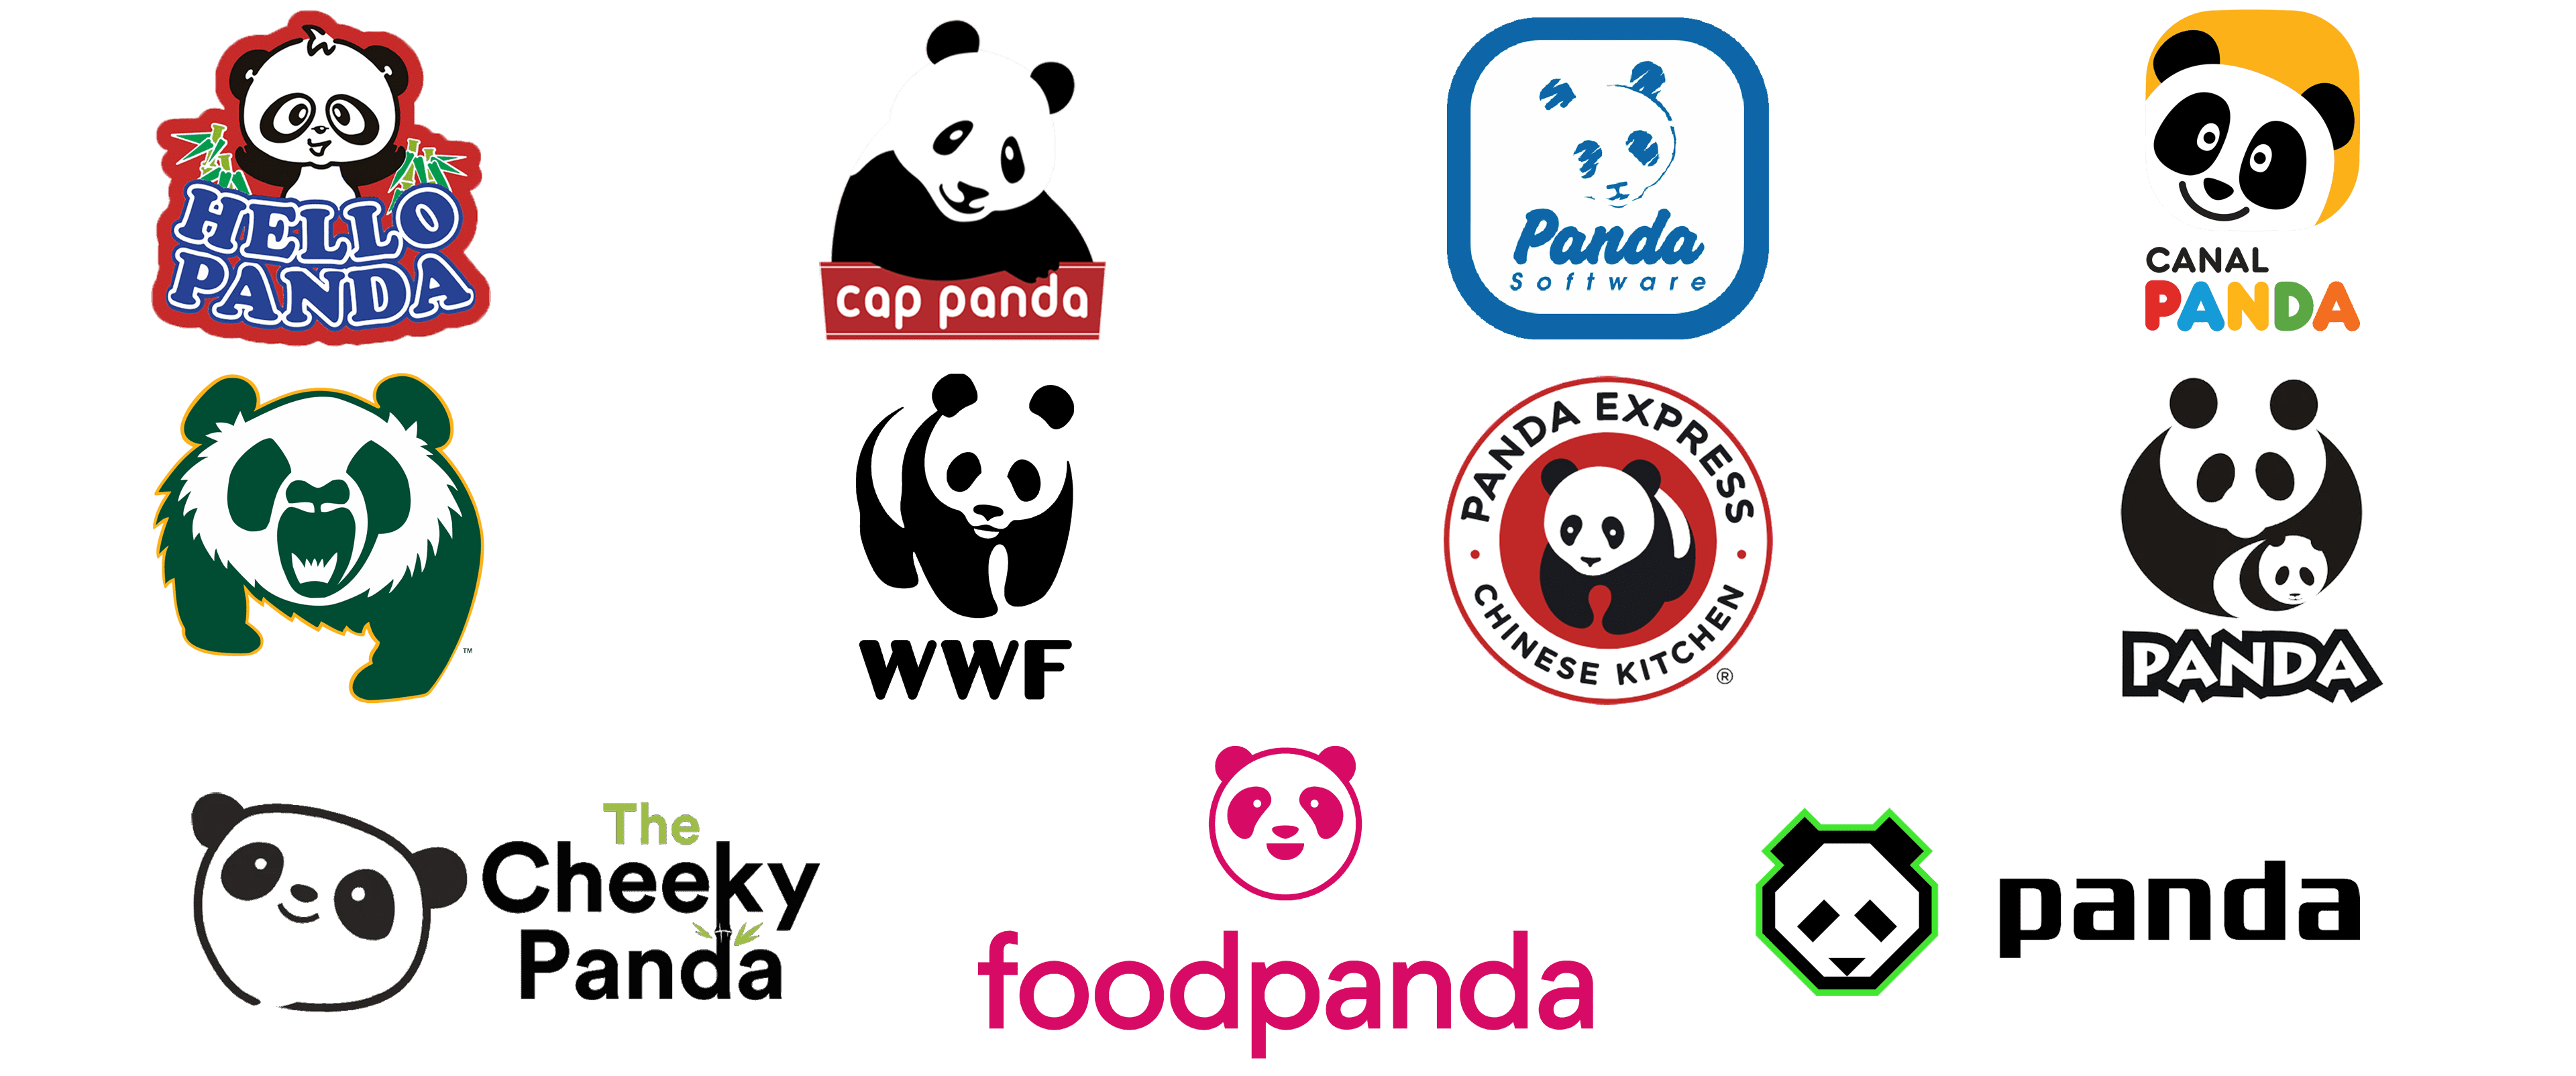 Most Famous Logos With a Panda